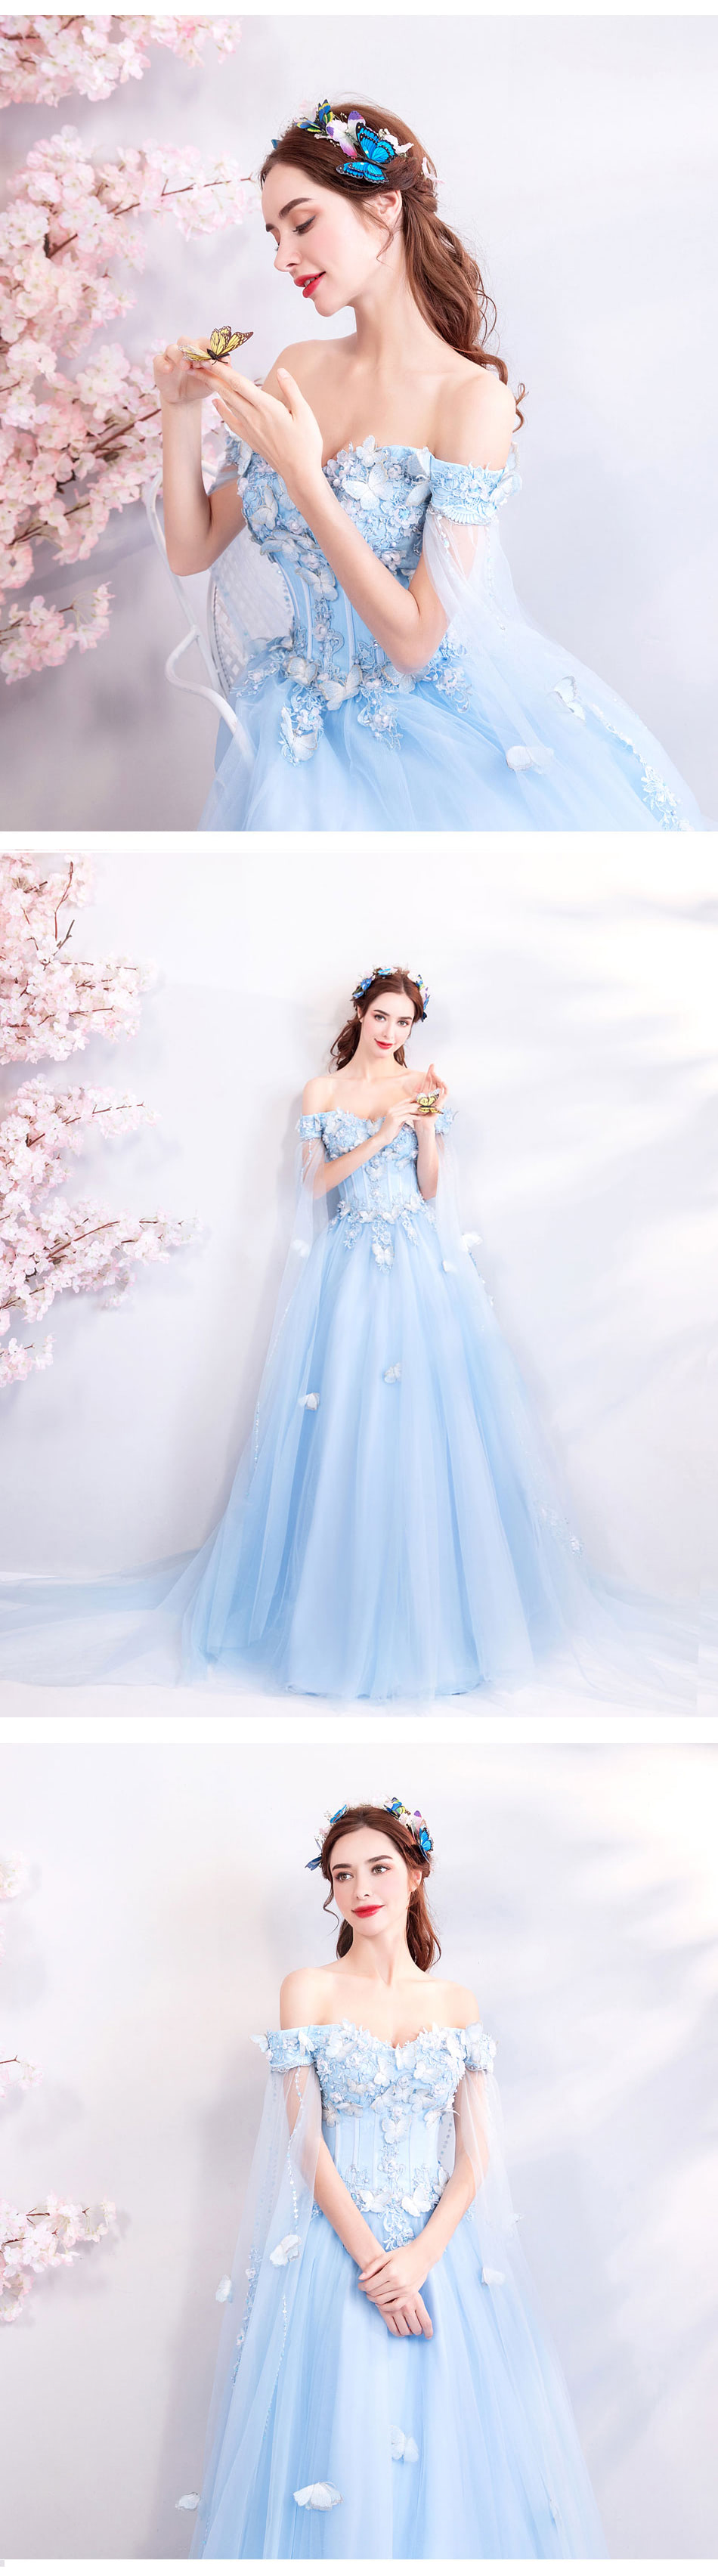 Beautiful-Lace-Blue-Tulle-Evening-Formal-Long-Dress-with-Butterfly09.jpg